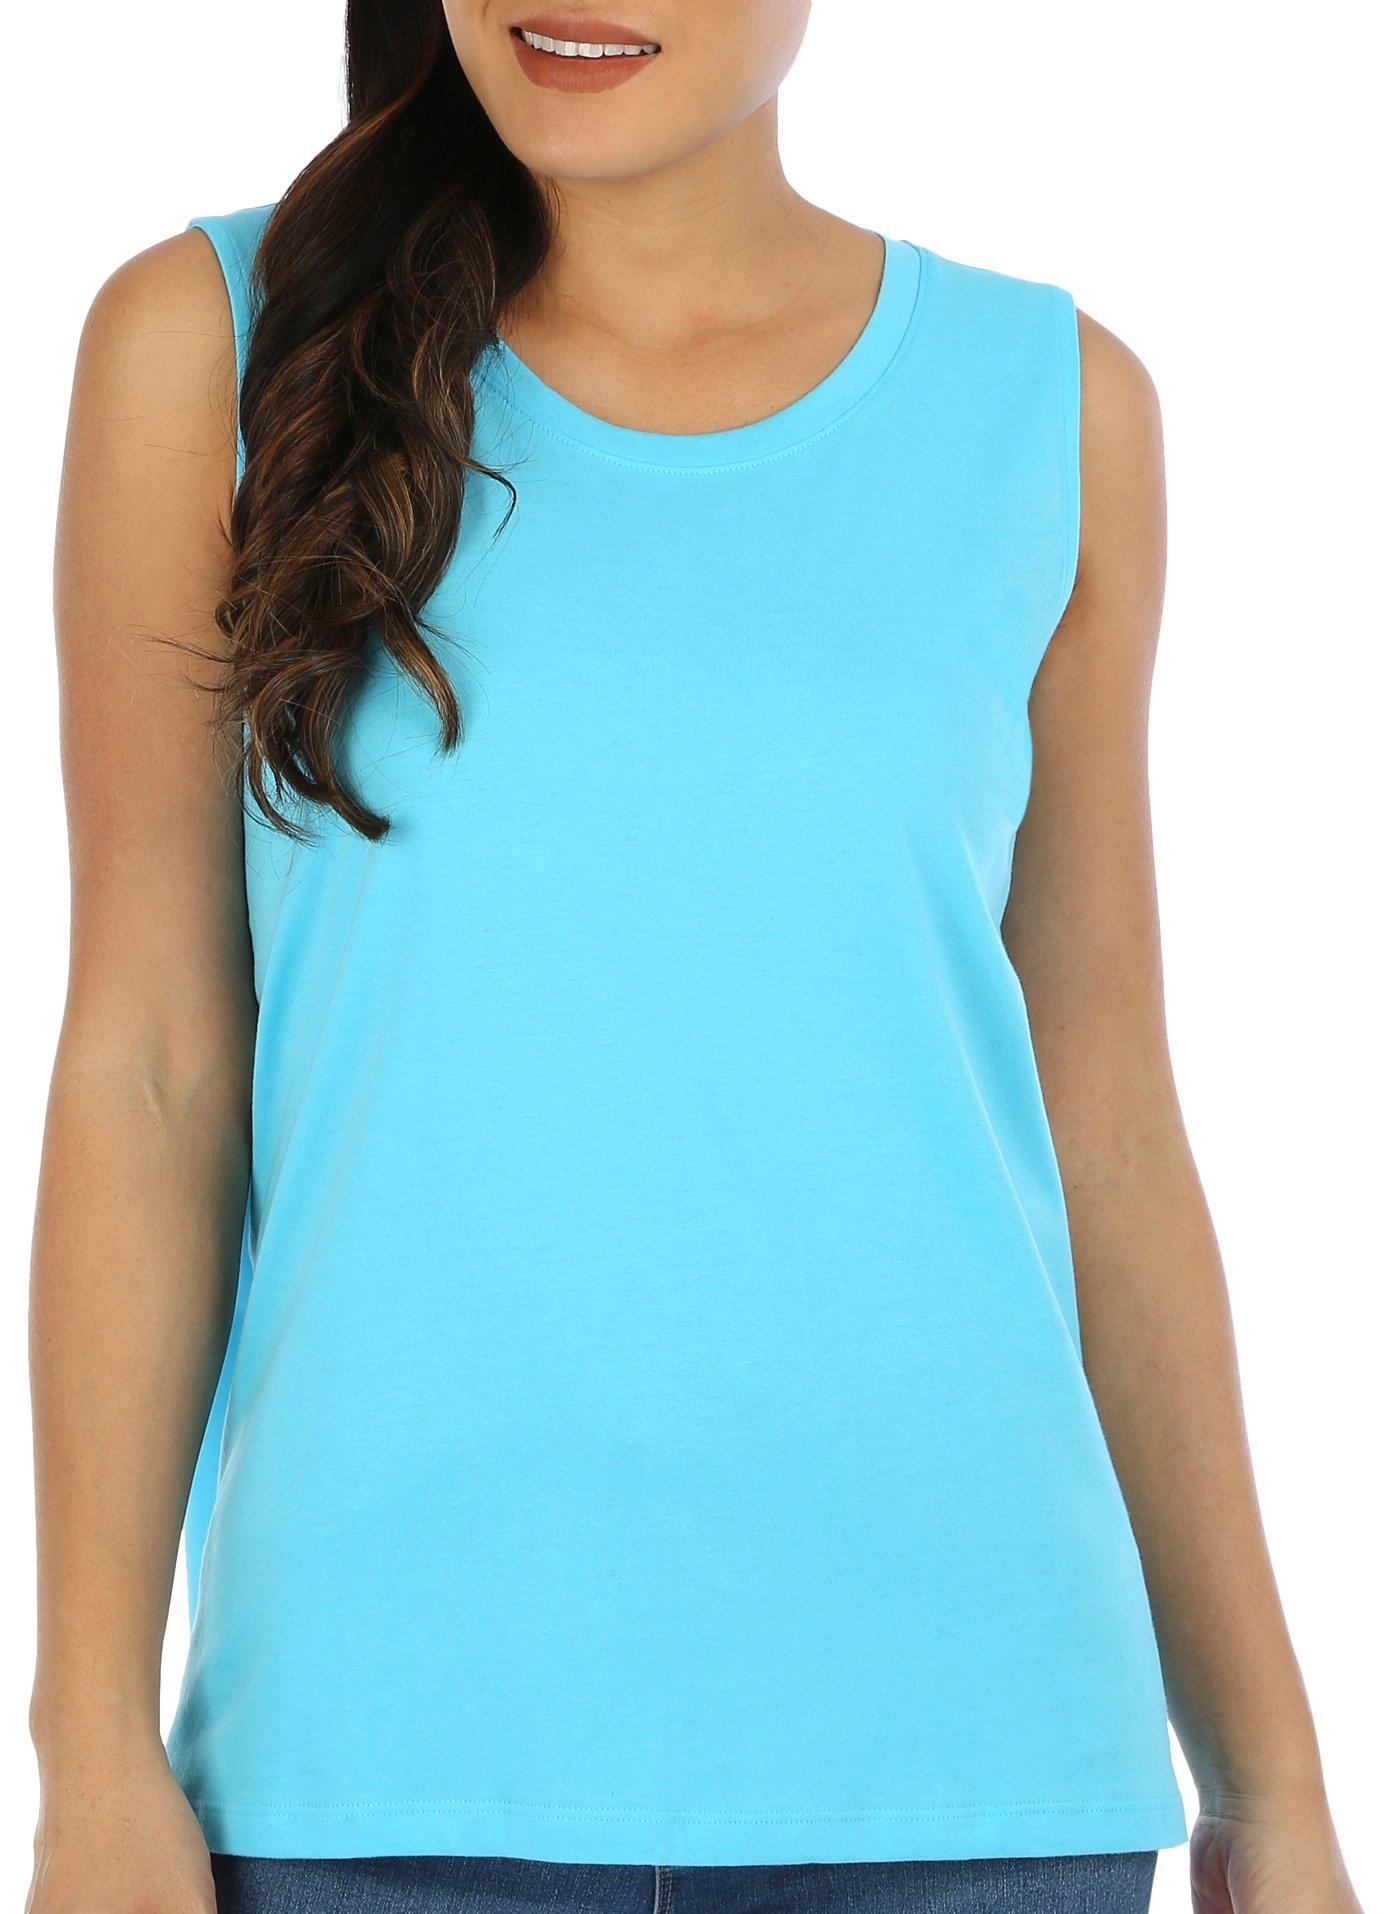 Coral Bay Petite Solid Crew Neck Sleeveless Top